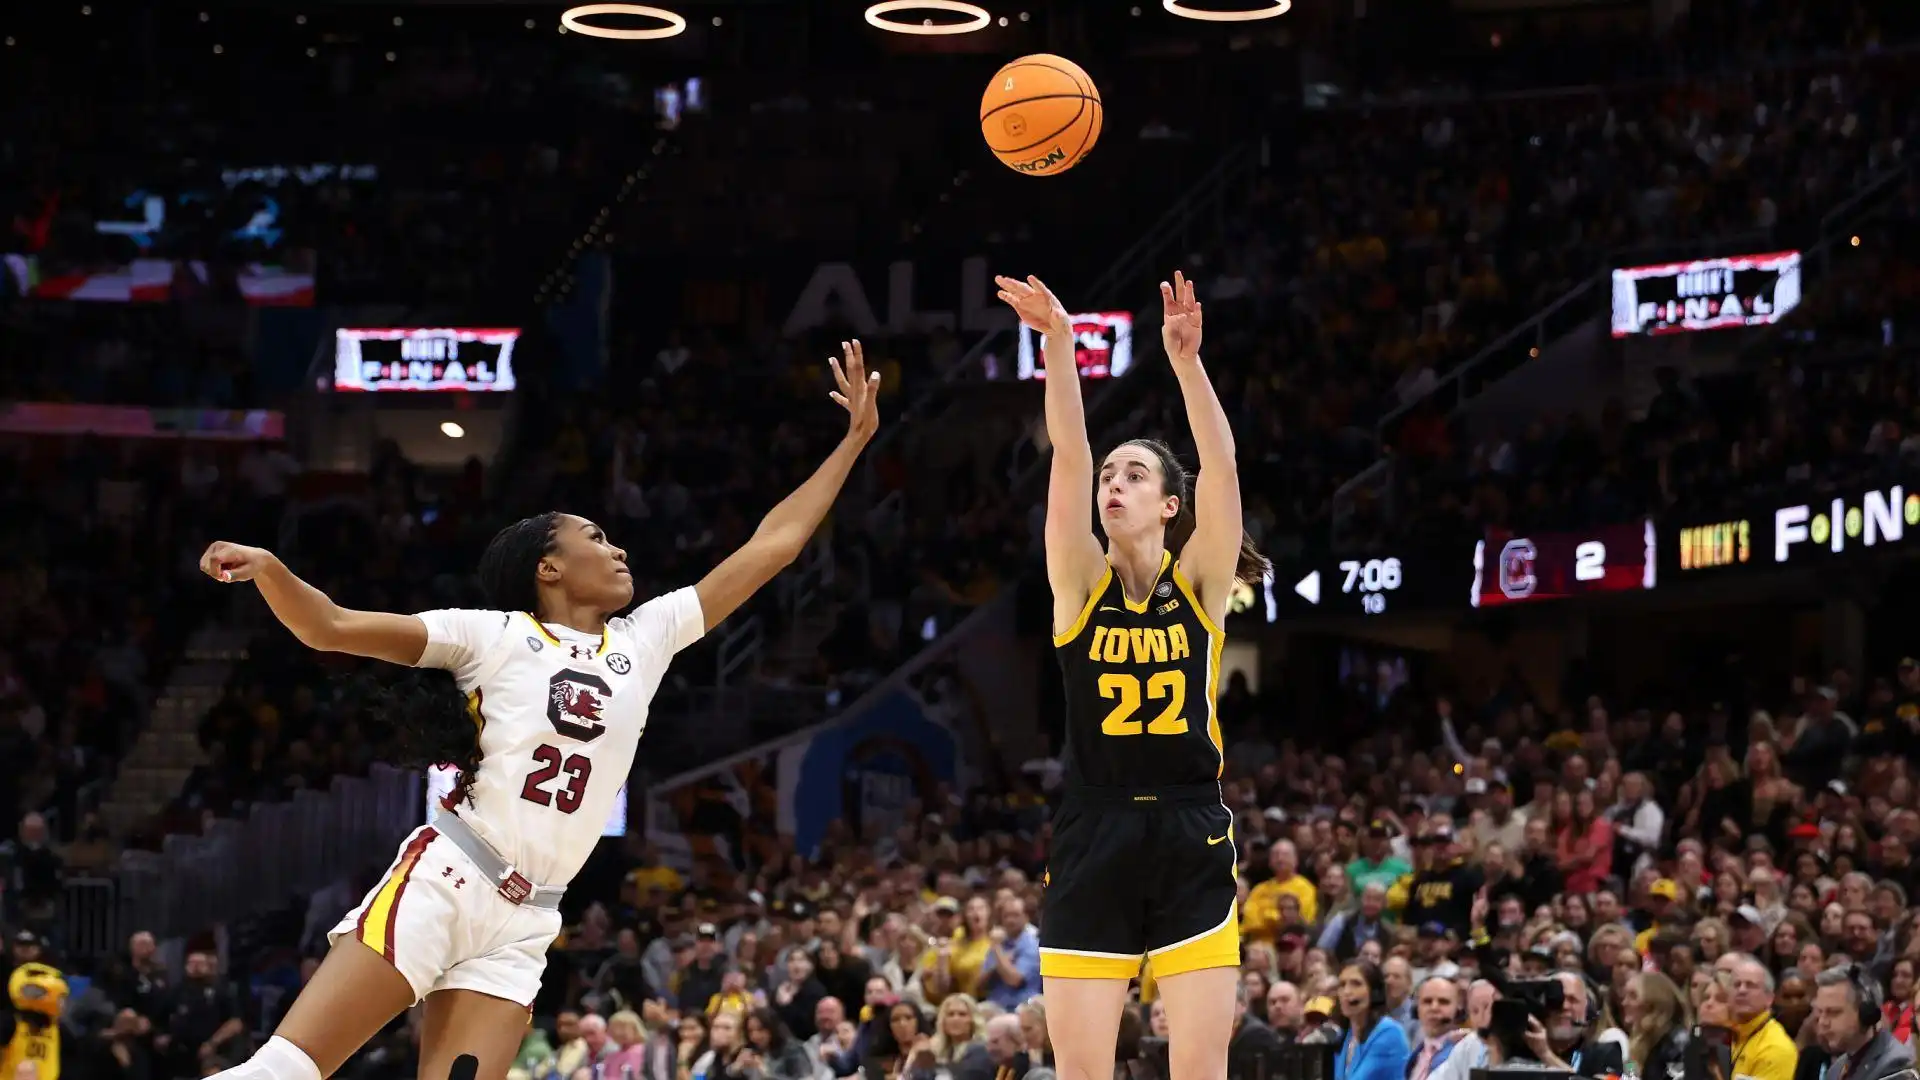 Iowa vs. South Carolina TV ratings for 2024 NCAA women's championship compared to other sports